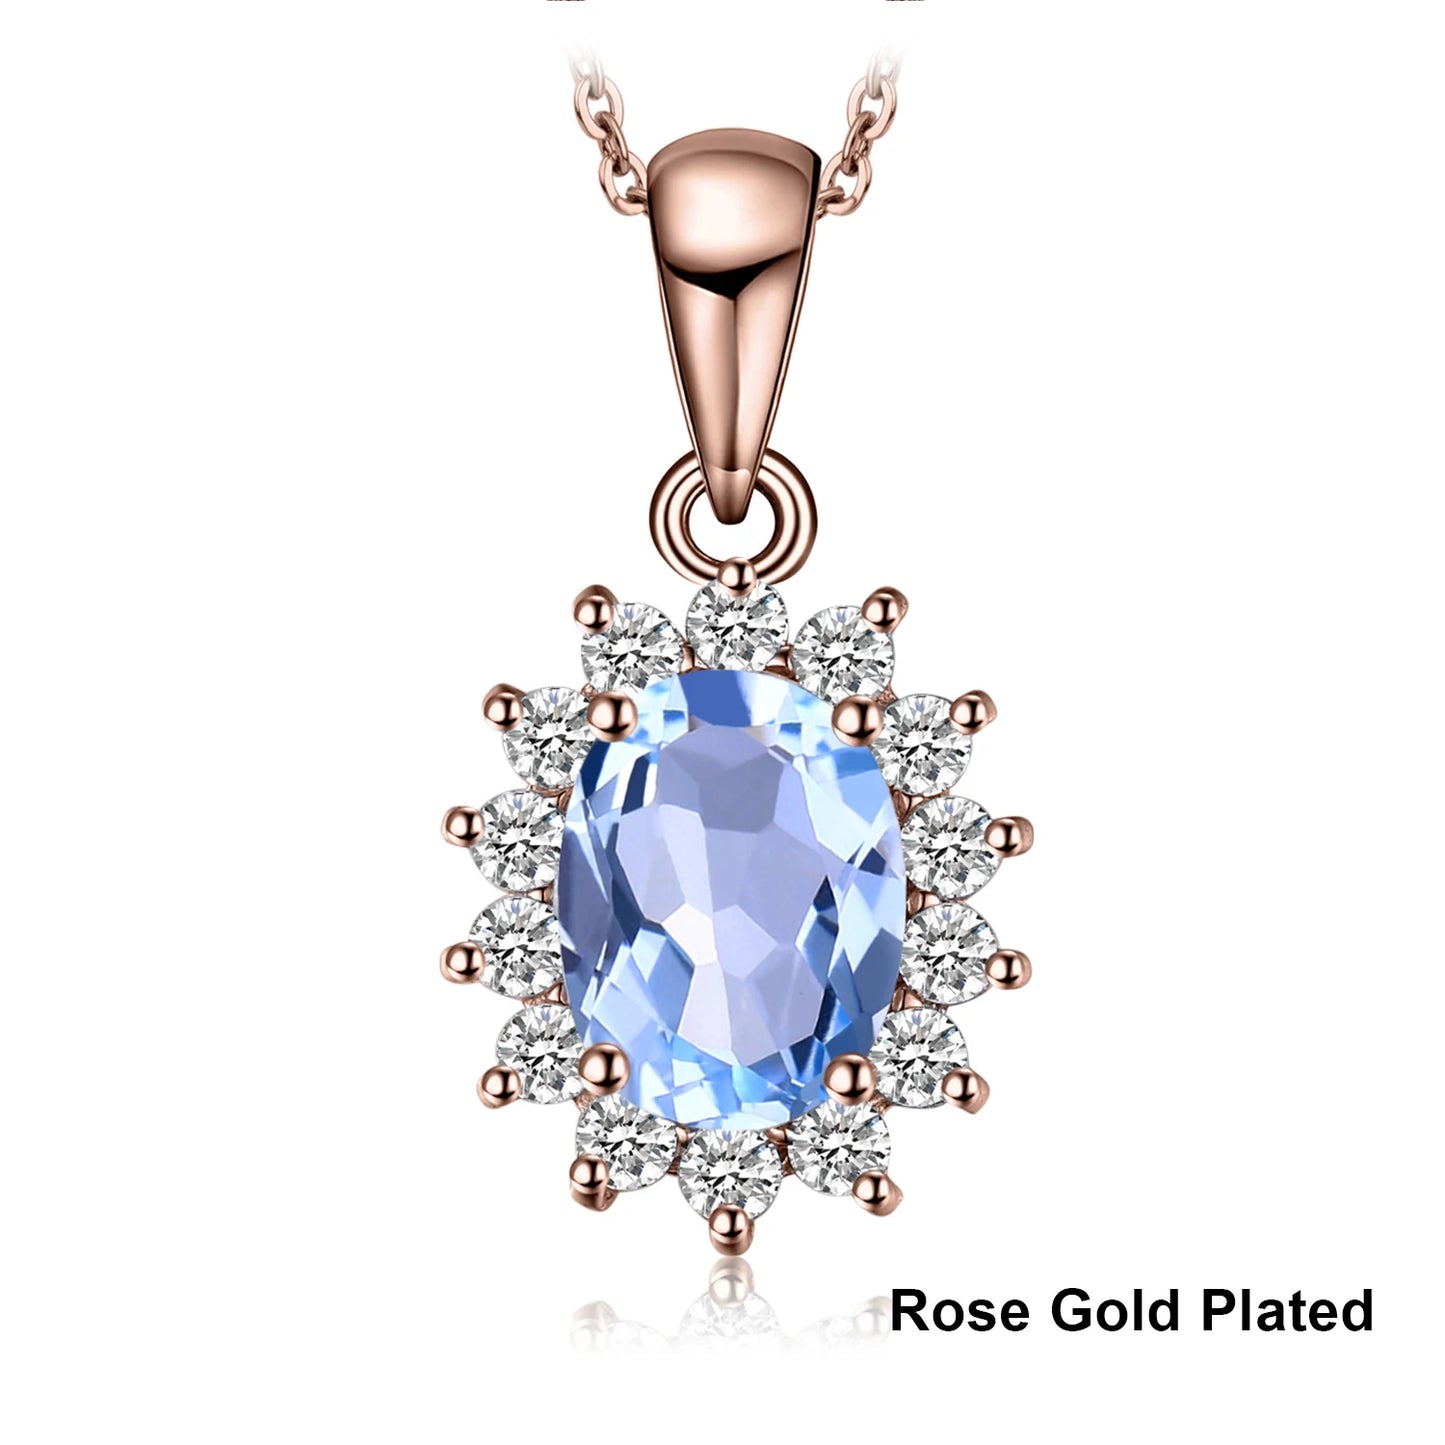 Jewelrypalace Created Alexandrite Natural Amethyst Garnet 925 Sterling Silver Pendant Necklace No Chain Yellow Rose Gold Plated